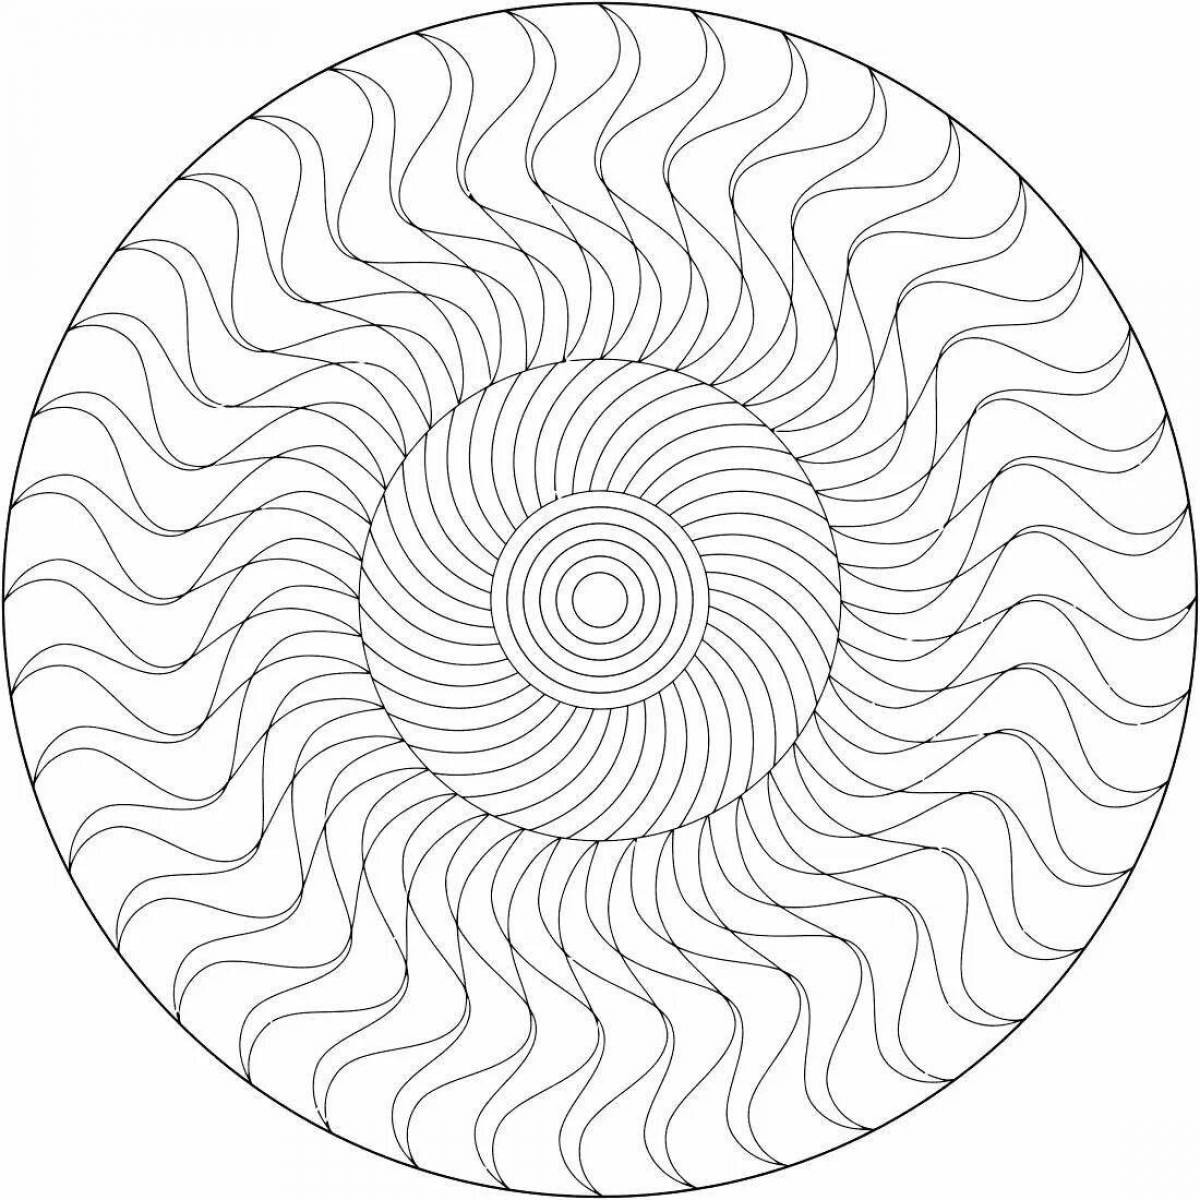 Complex spiral drawing page